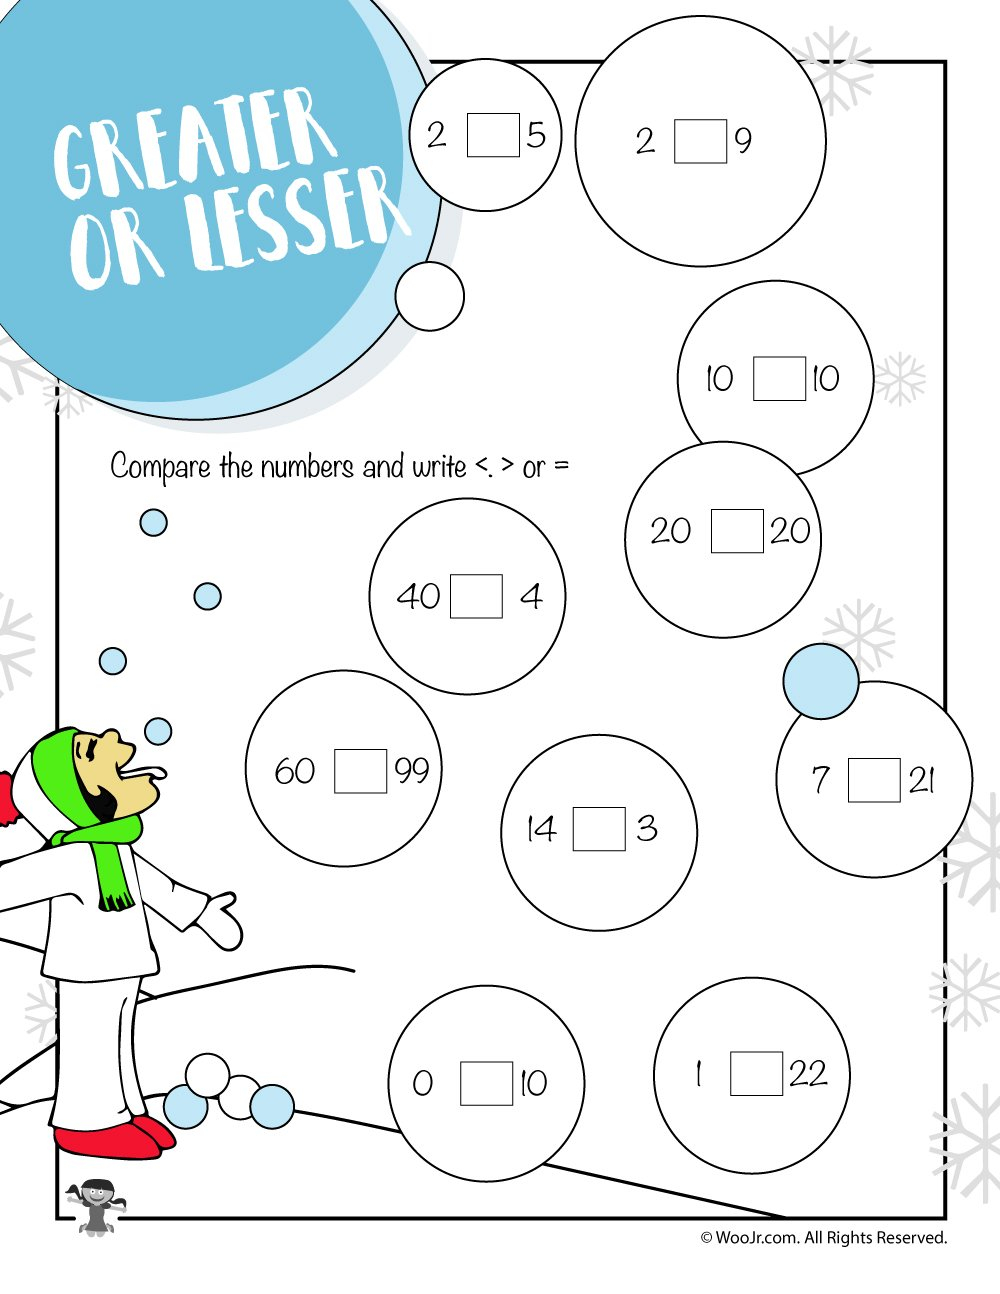 Greater Less Or Equal Winter Math Worksheet  Woo Jr Kids Activities With Winter Math Worksheets